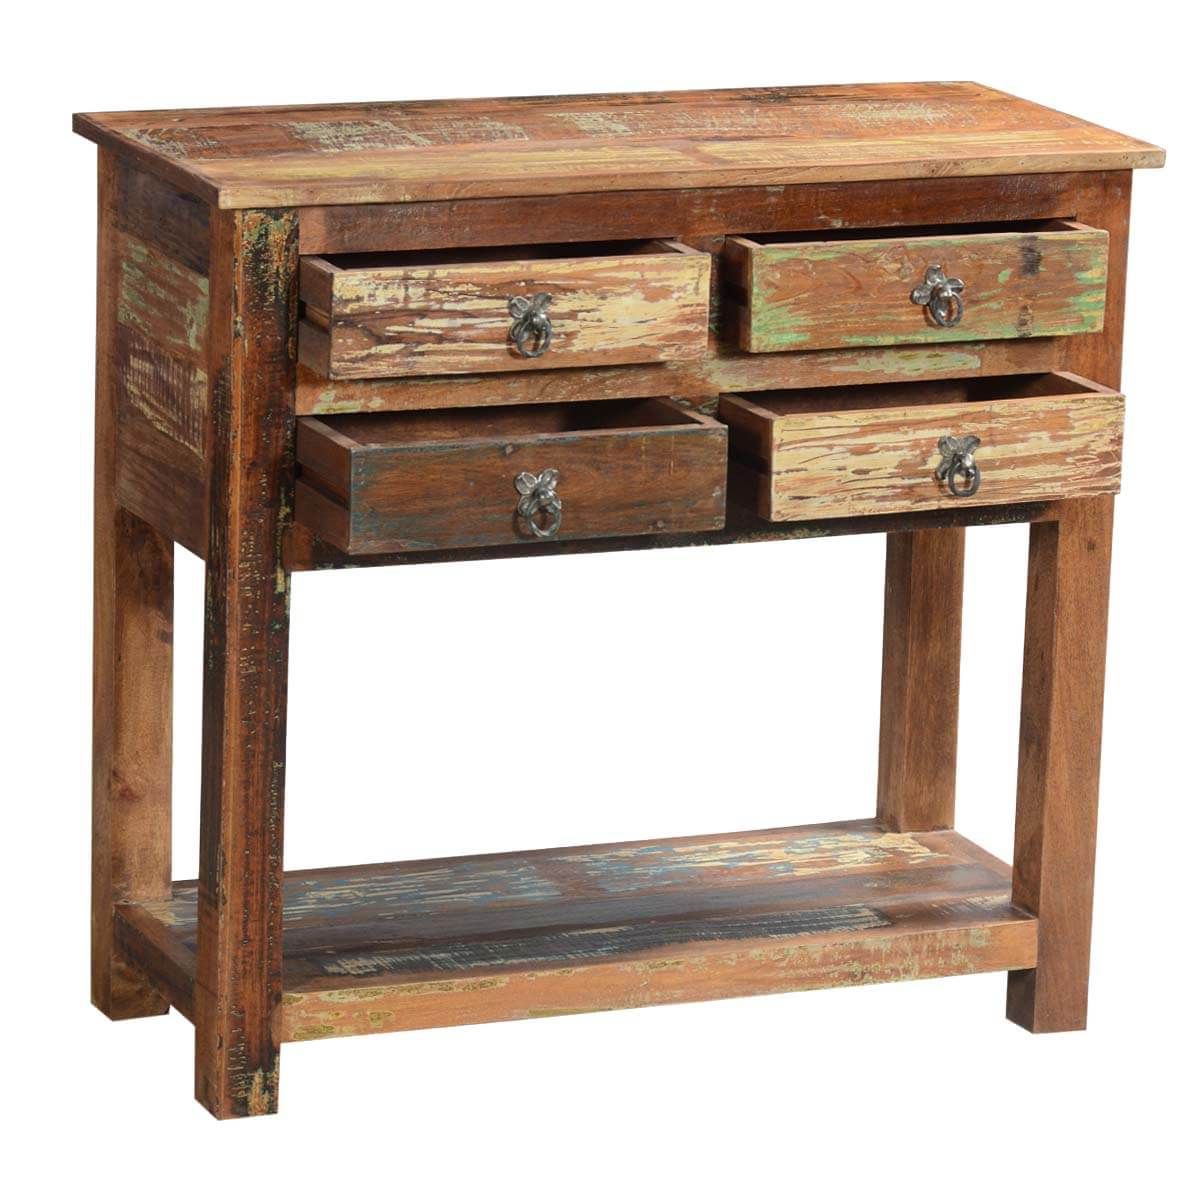 Ashland Rustic Reclaimed Wood 4 Drawer Hallway Console Table For Well Liked Rustic Espresso Wood Console Tables (View 9 of 10)